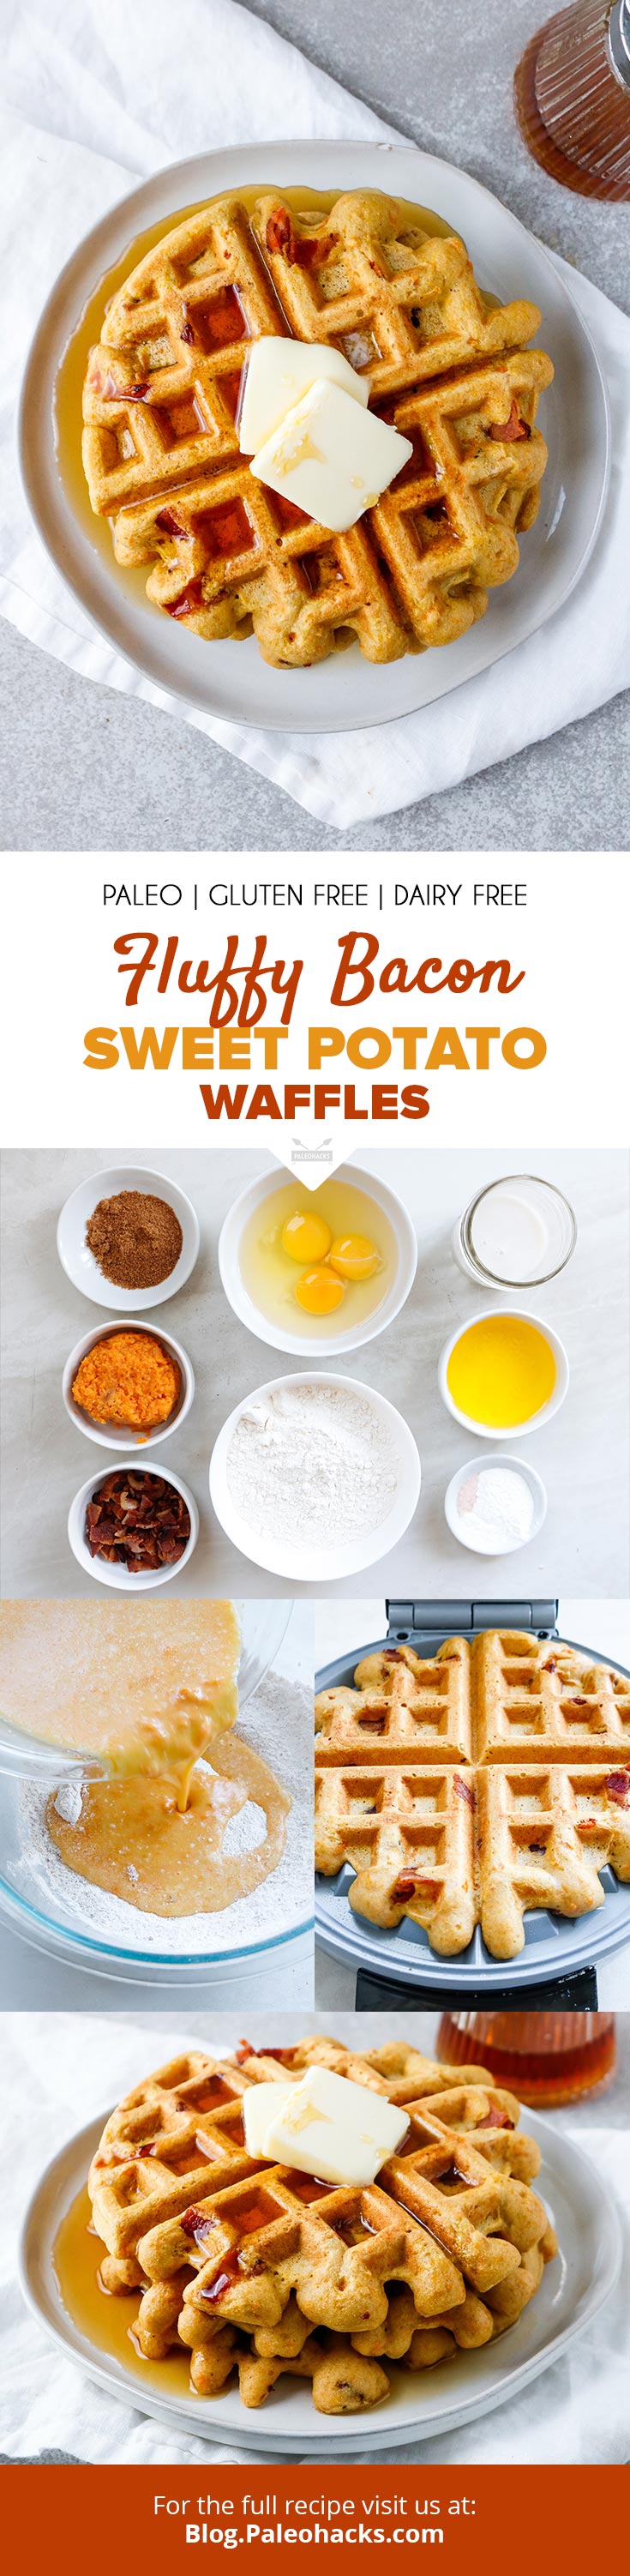 Ditch the grains and gluten and serve up these Bacon Sweet Potato Waffles with rich maple syrup and grass-fed butter.